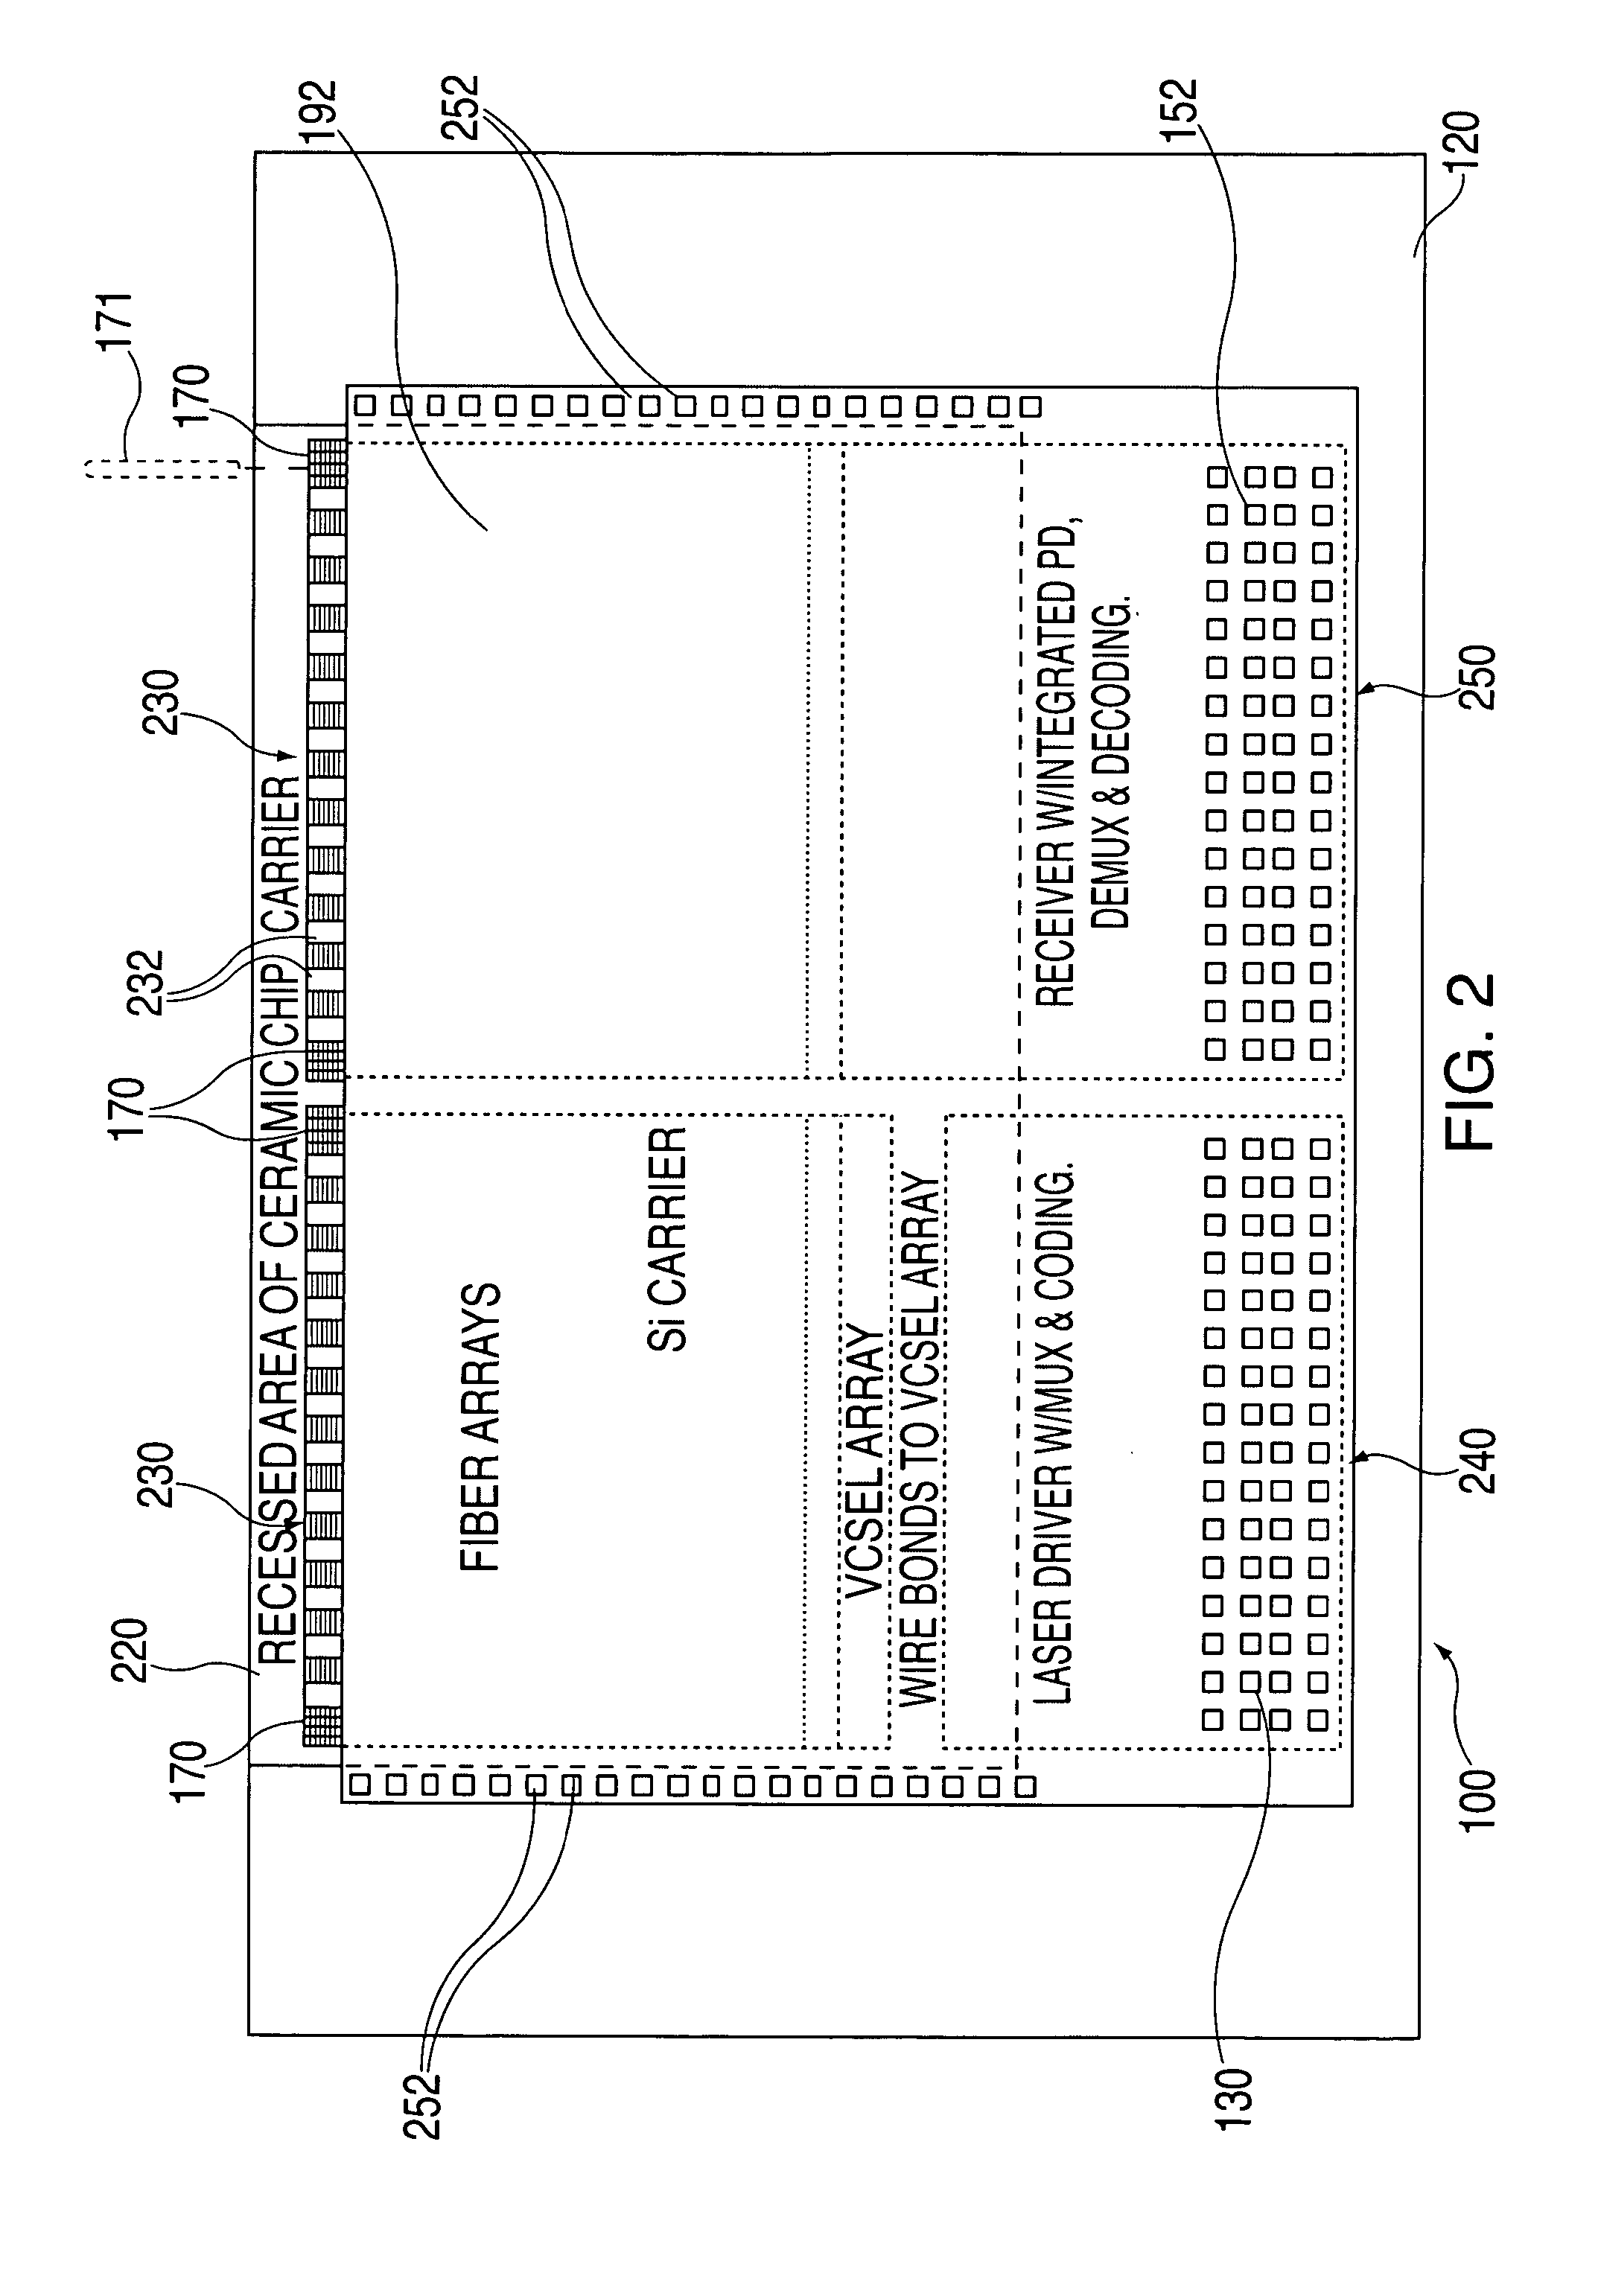 Method and apparatus for providing parallel optoelectronic communication with an electronic device